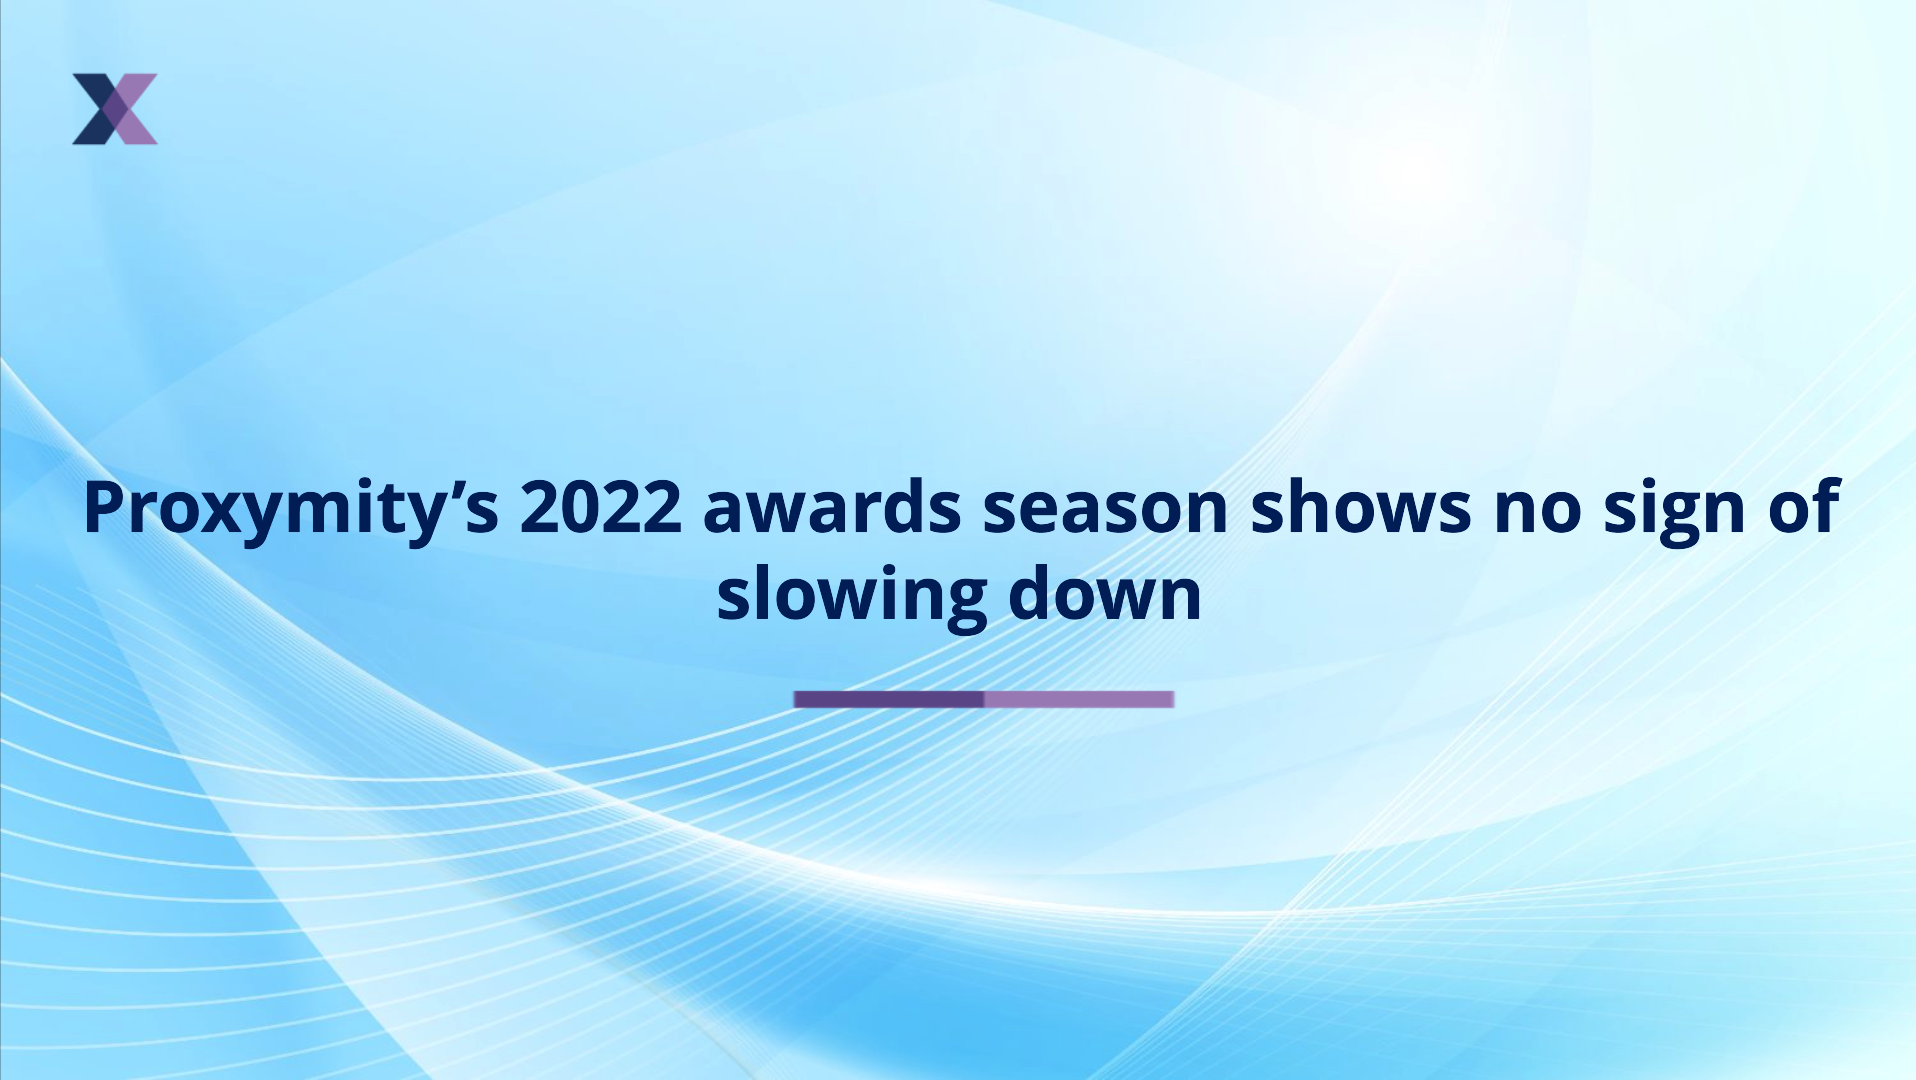 Proxymity’s 2022 awards season shows no sign of slowing down